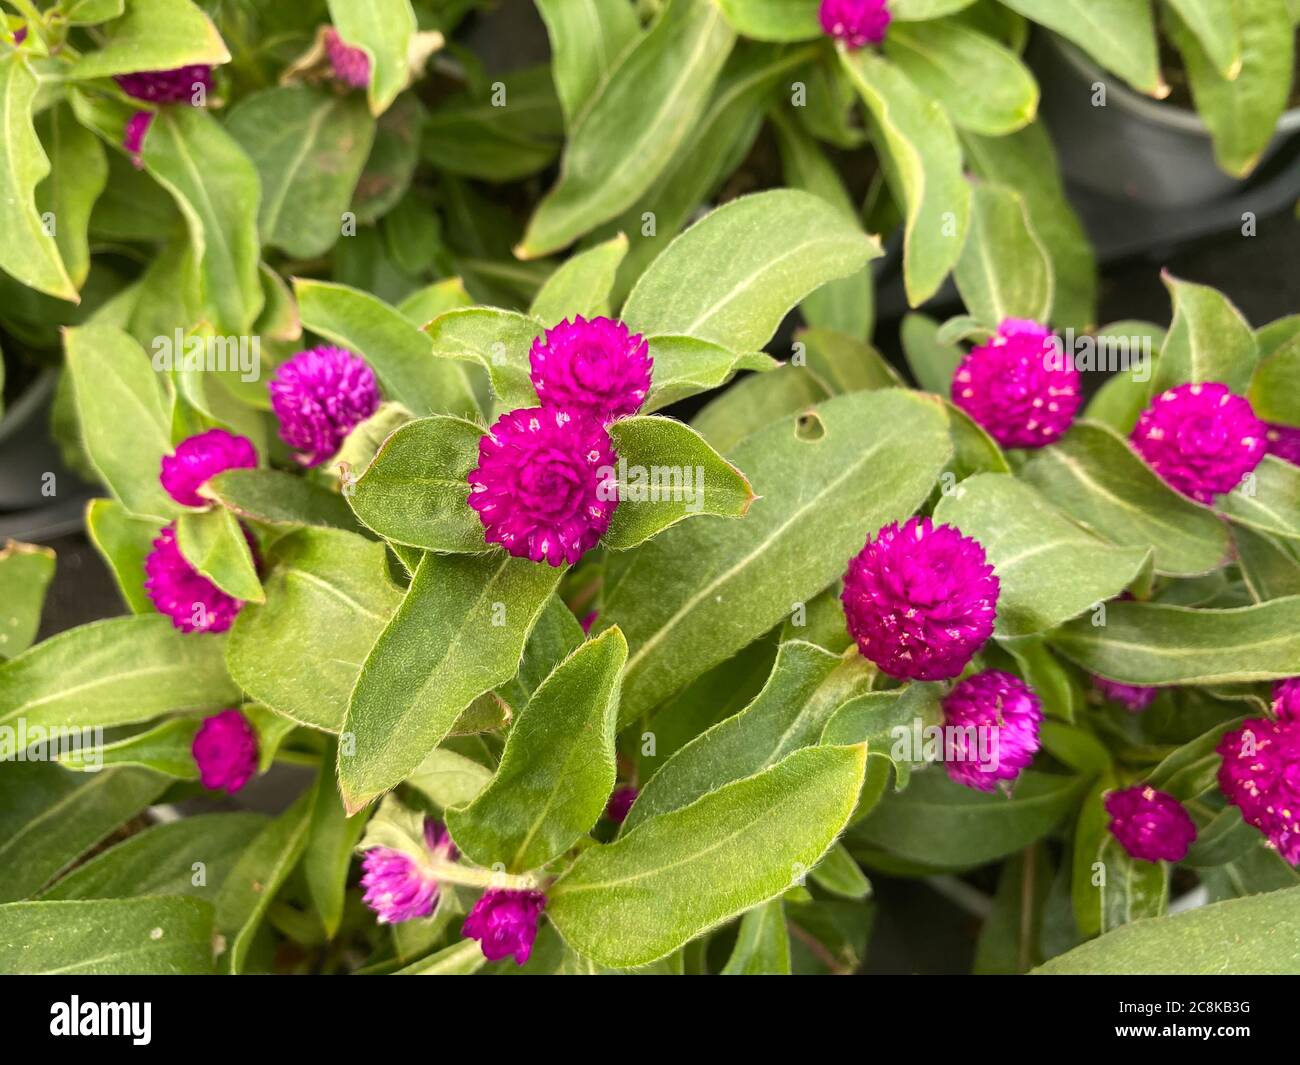 Top view closeup of isolated purple amaranth globe seed flowers (gomphrena globosa) with green leaves Stock Photo